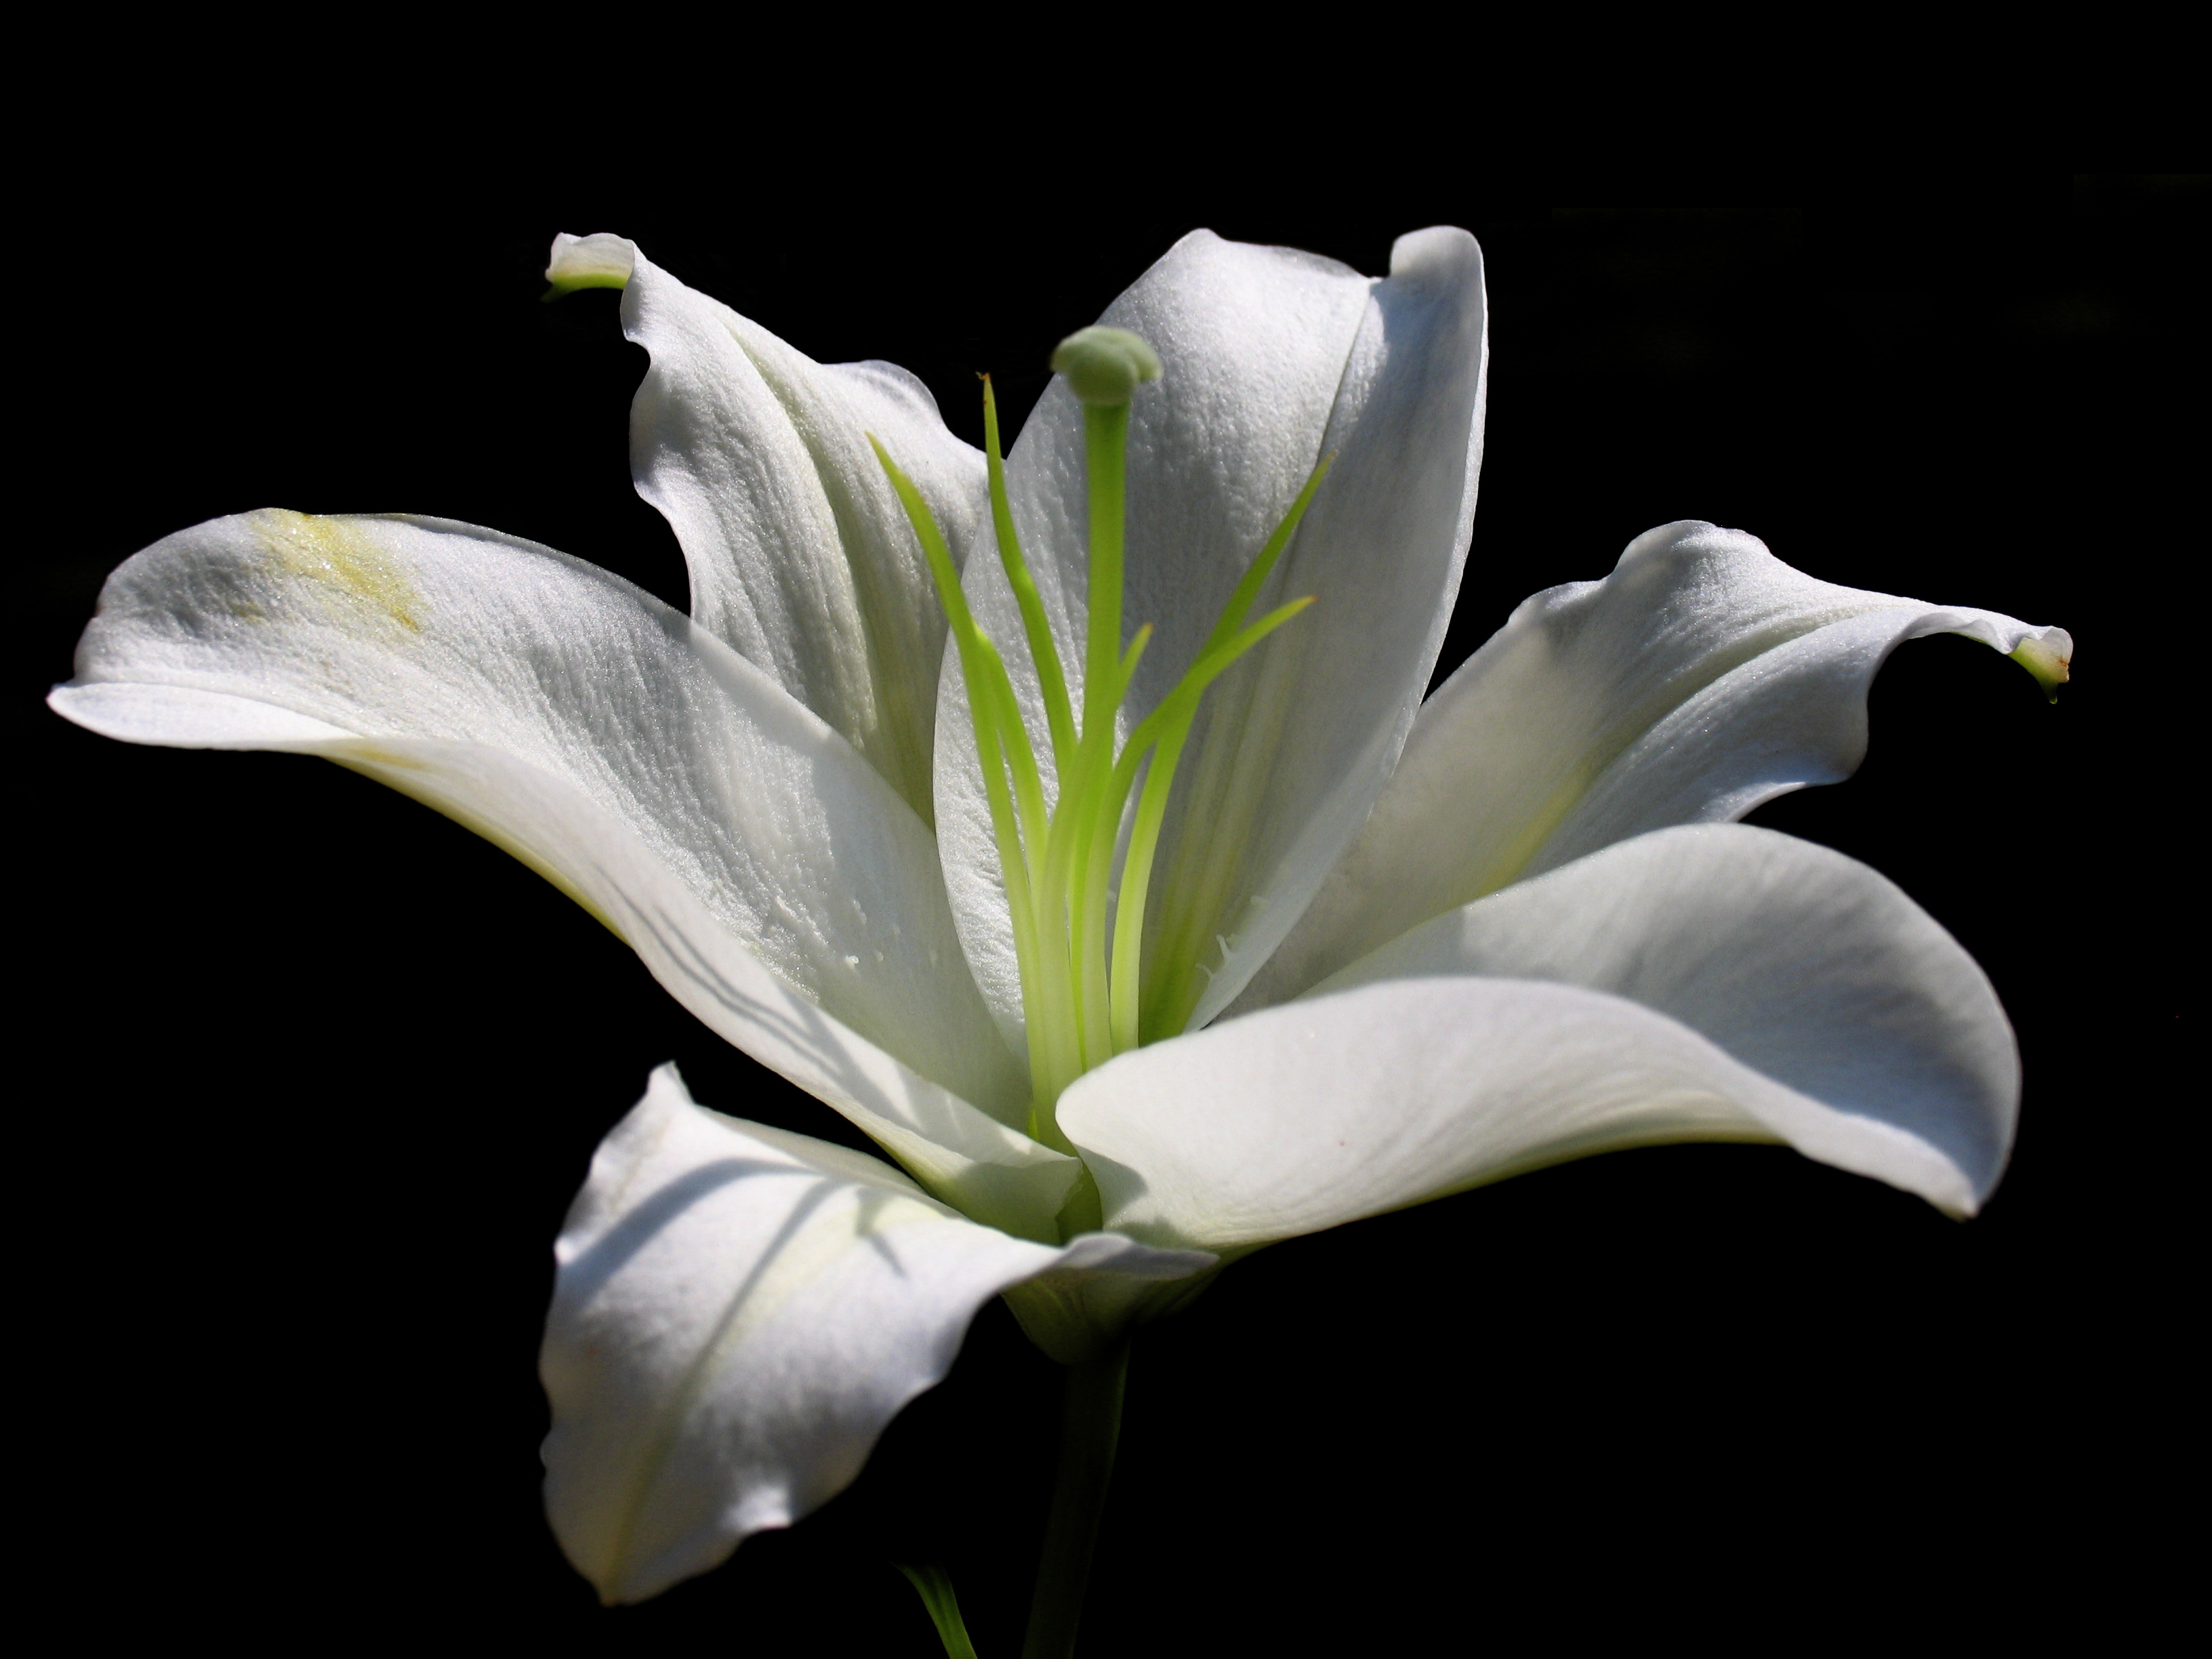 White Lily Flower Computer Wallpapers, Desktop Backgrounds | 1.9 MB ...